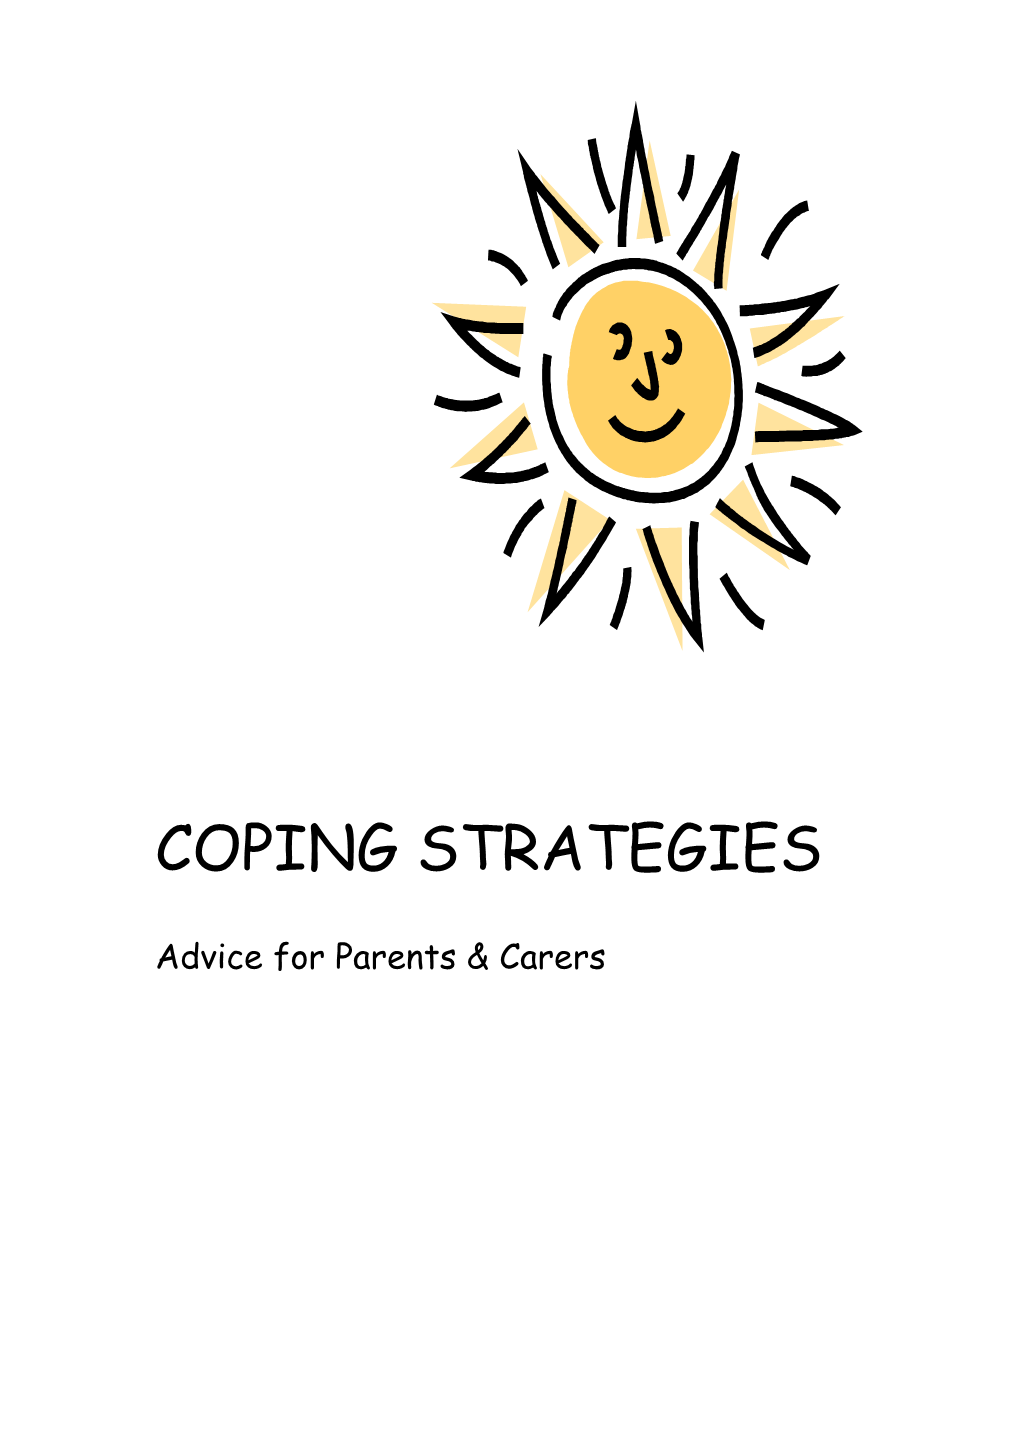 Advice for Parents & Carers